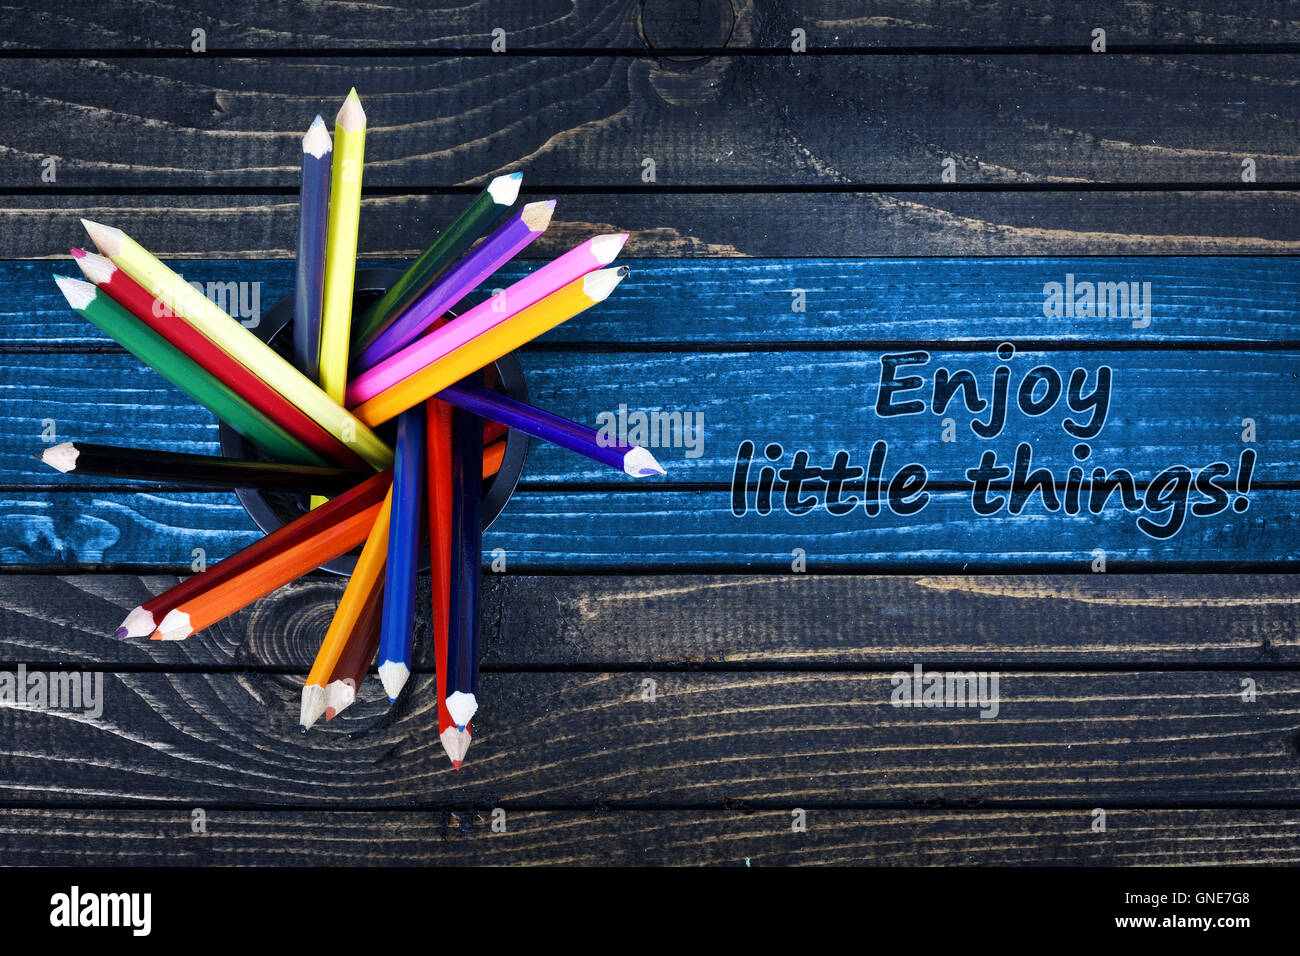 Enjoy little things text painted and group of pencils on wooden table Stock Photo